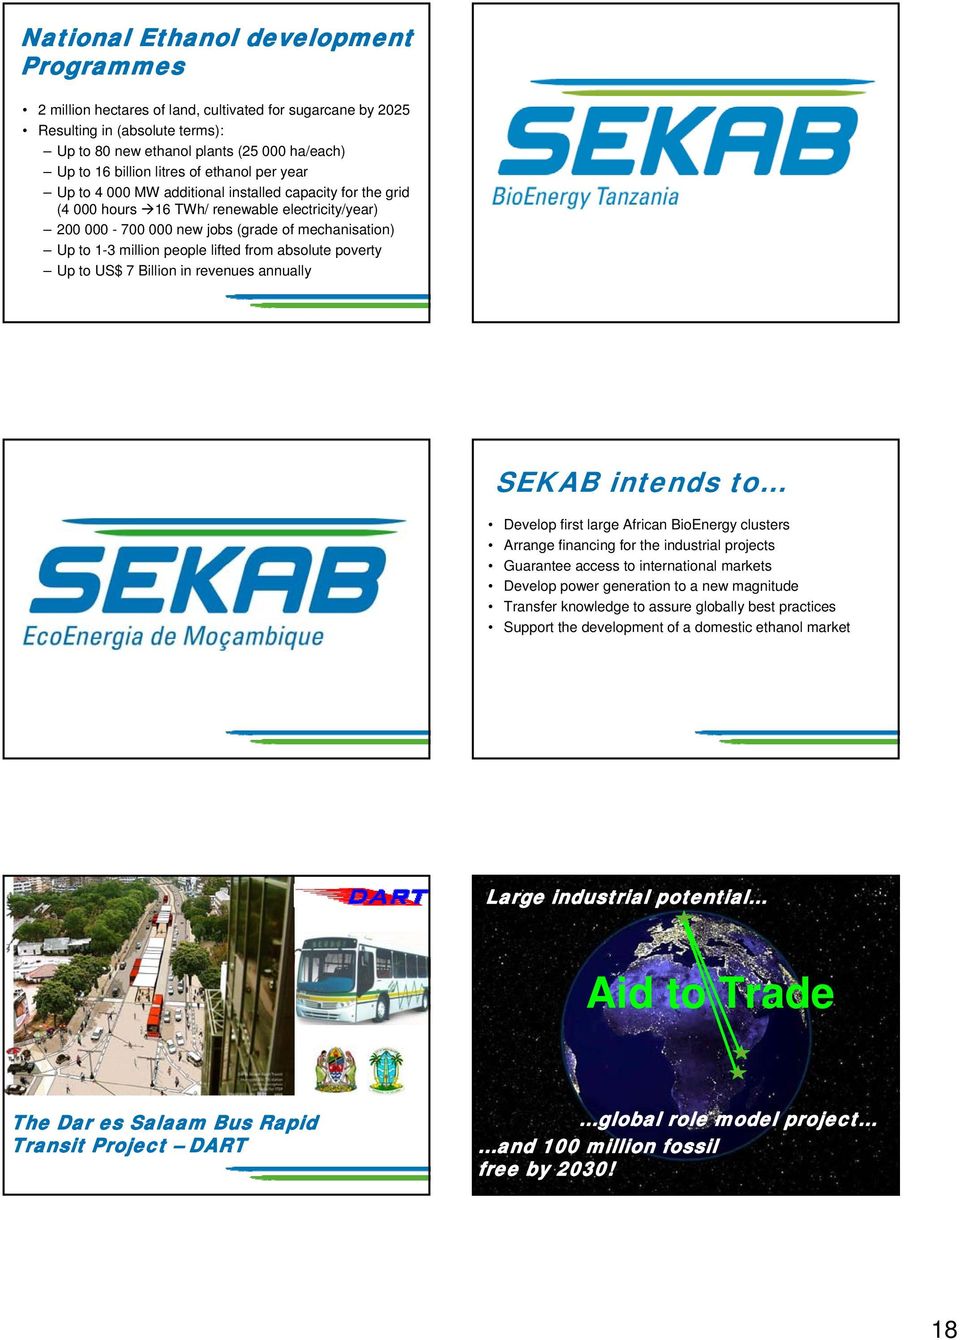 poverty Up to US$ 7 Billion in revenues annually SEKAB intends to Develop first large African BioEnergy clusters Arrange financing for the industrial projects Guarantee access to international